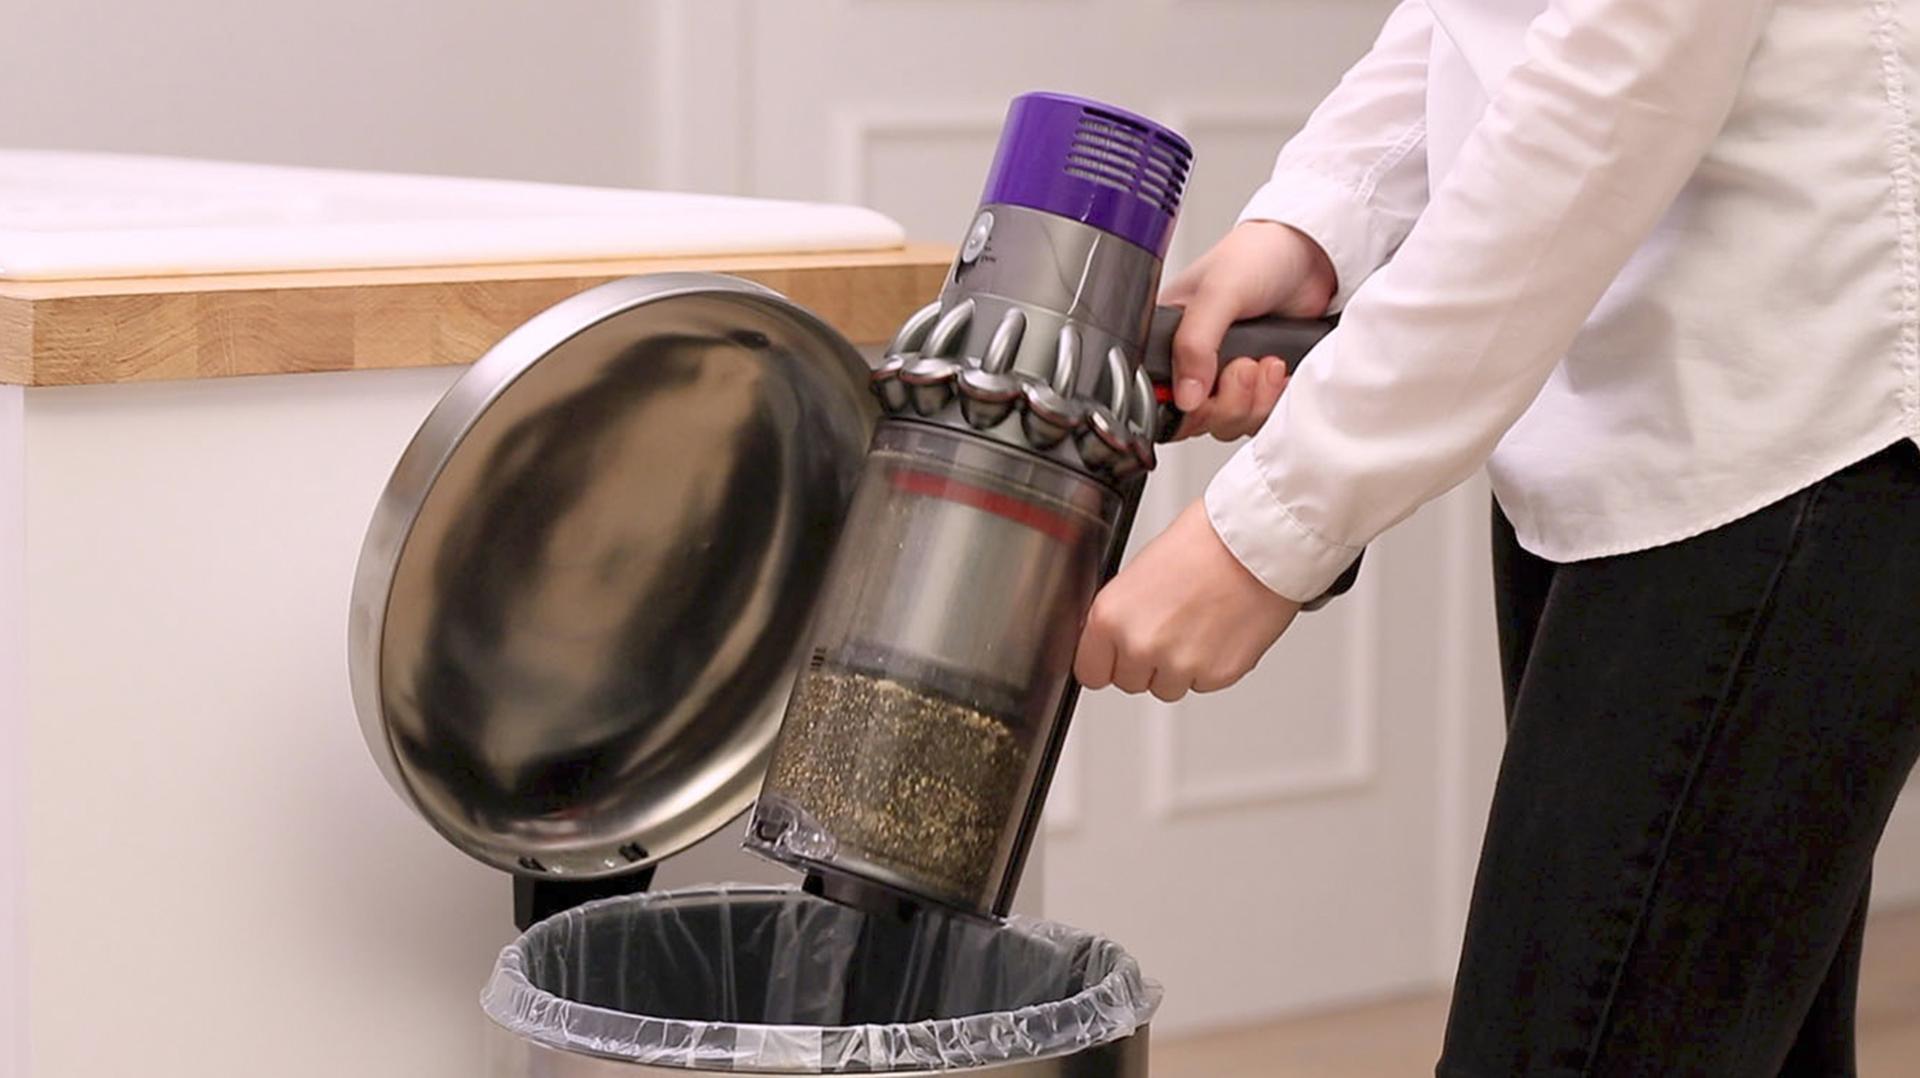 Play the video. How to empty the clear bin.